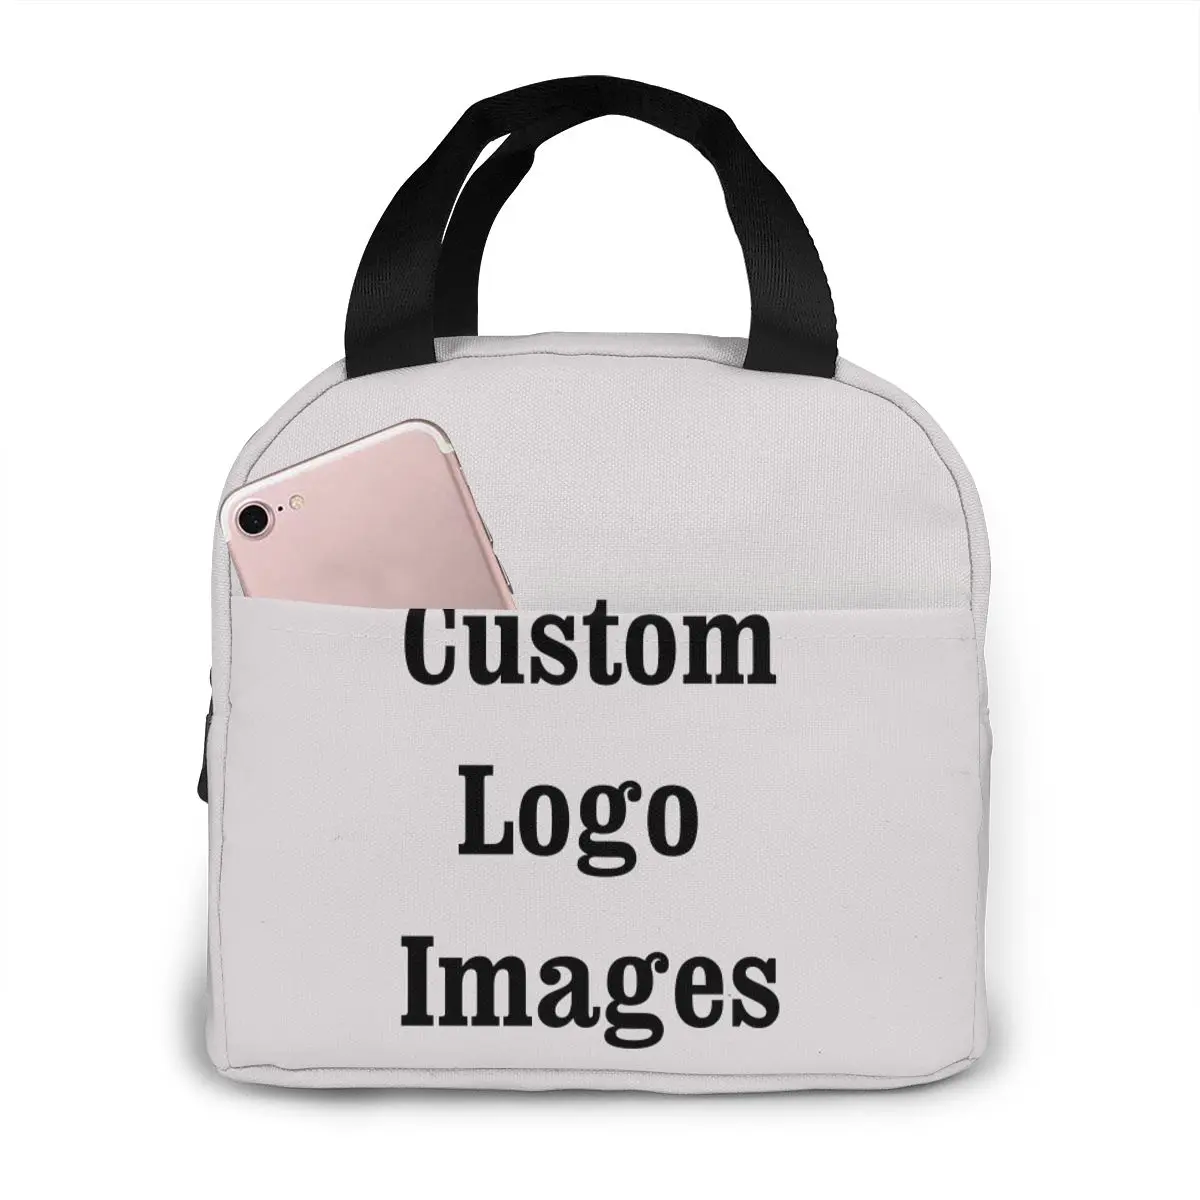 Custom Logo Cooler Lunch Bag Pattern Print Girls Boys Portable Thermal Food Picnic Bags for School Work Tote Box Dropshipping game little nightmares lunch bag 3d design cartoon boys girls portable thermal food picnic bags kids school tote staff lunch bag